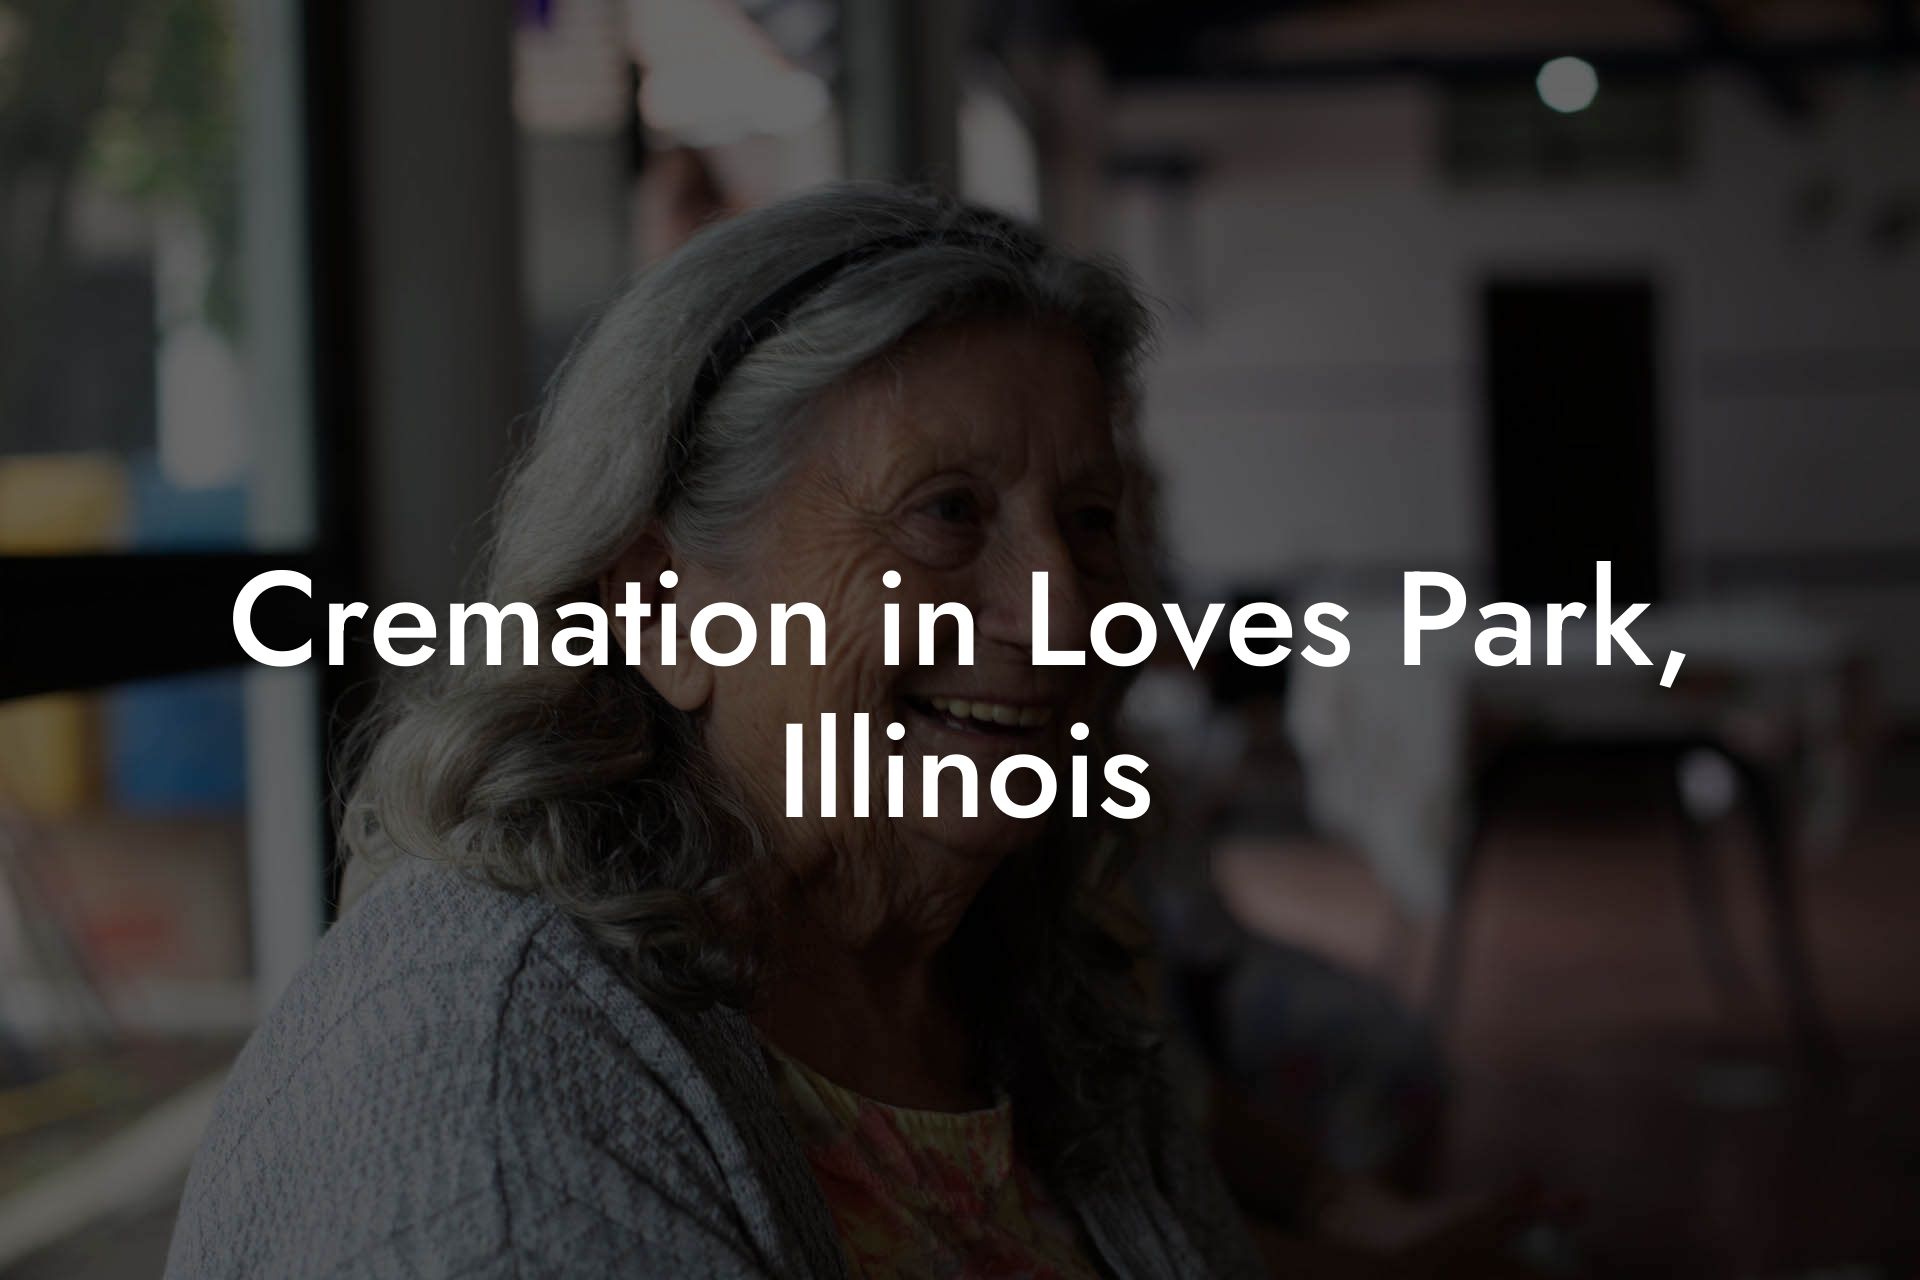 Cremation in Loves Park, Illinois